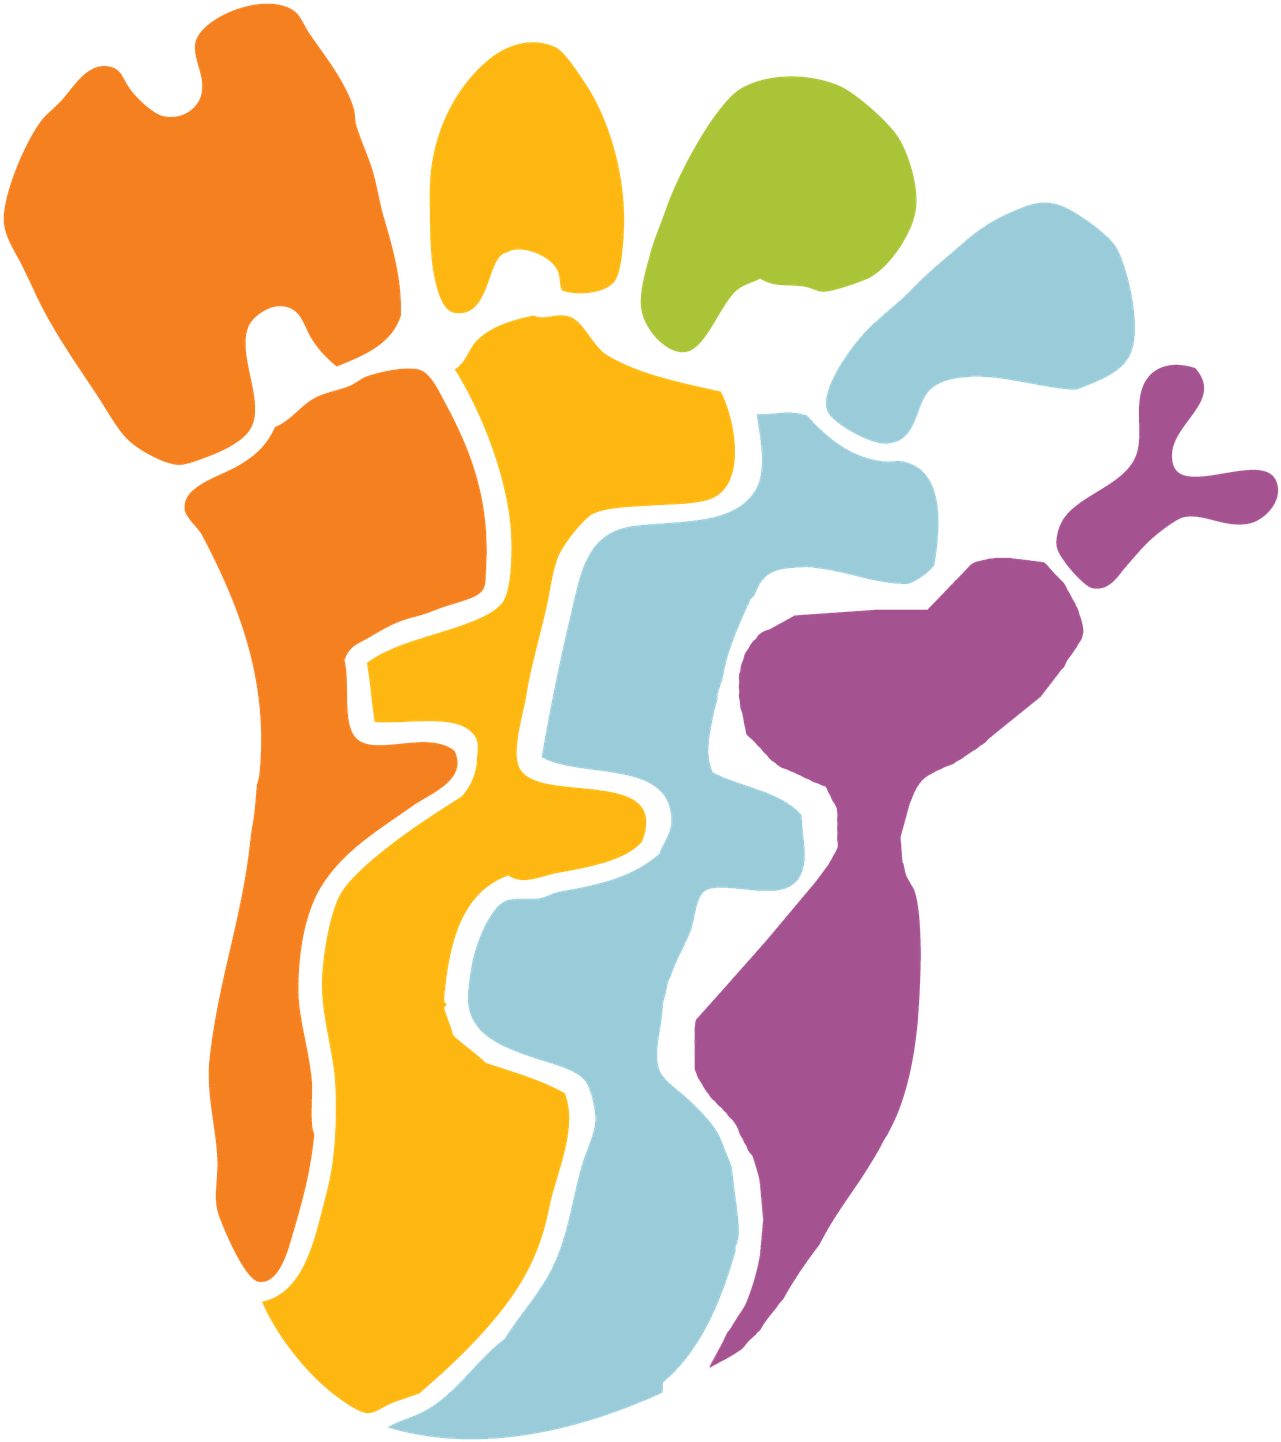 A Colorful Foot Print With Different Colors